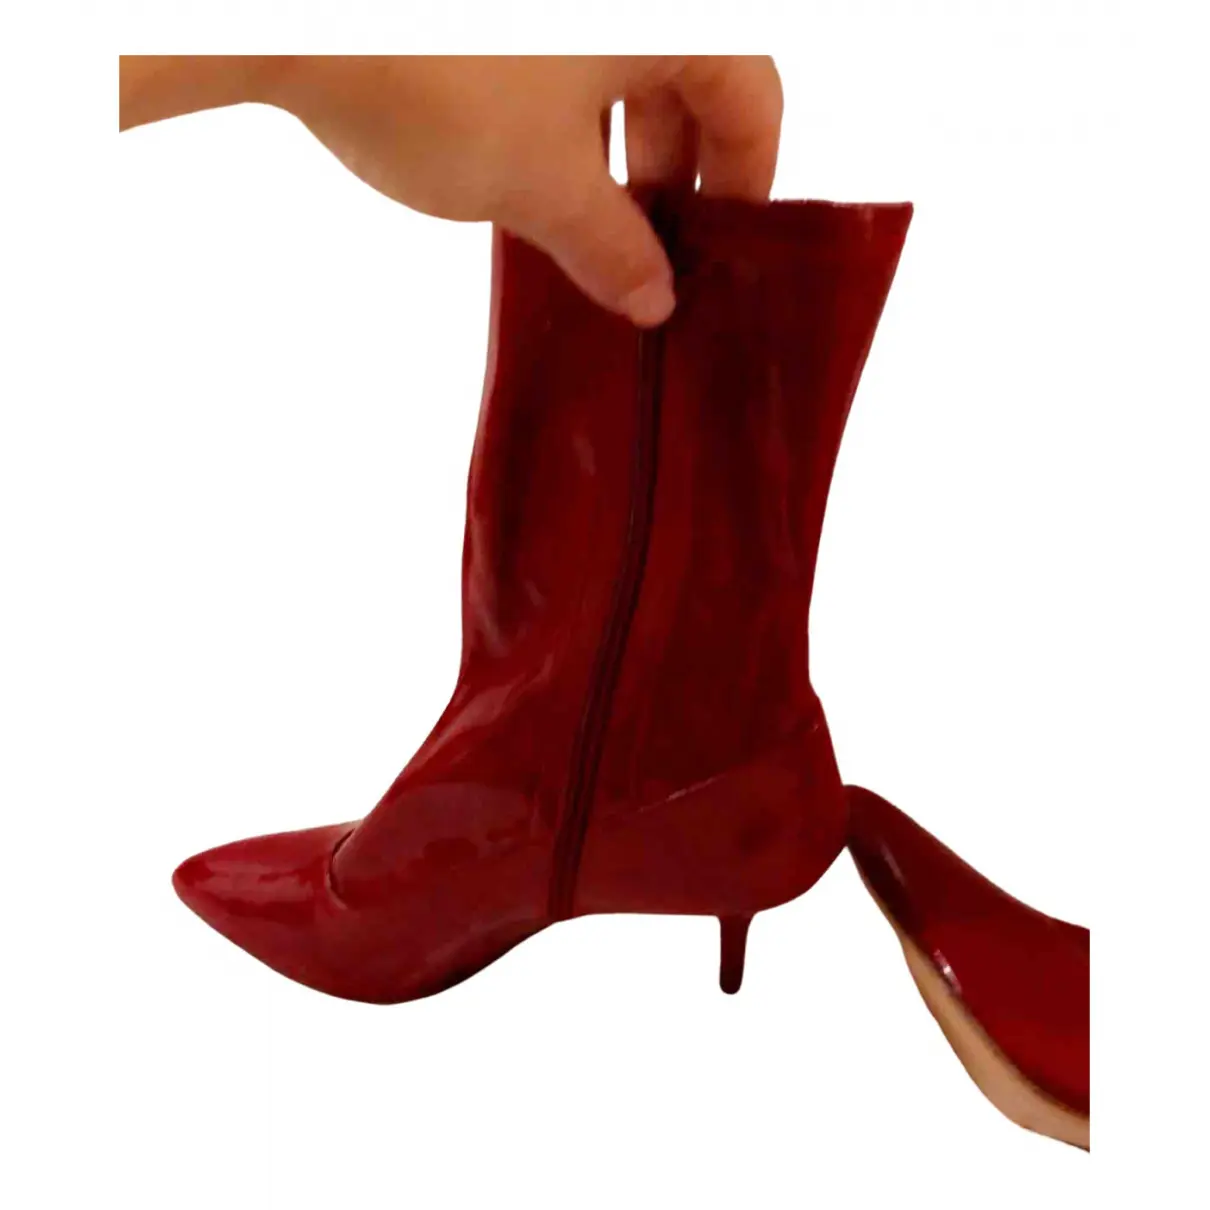 Buy Stuart Weitzman Patent leather ankle boots online